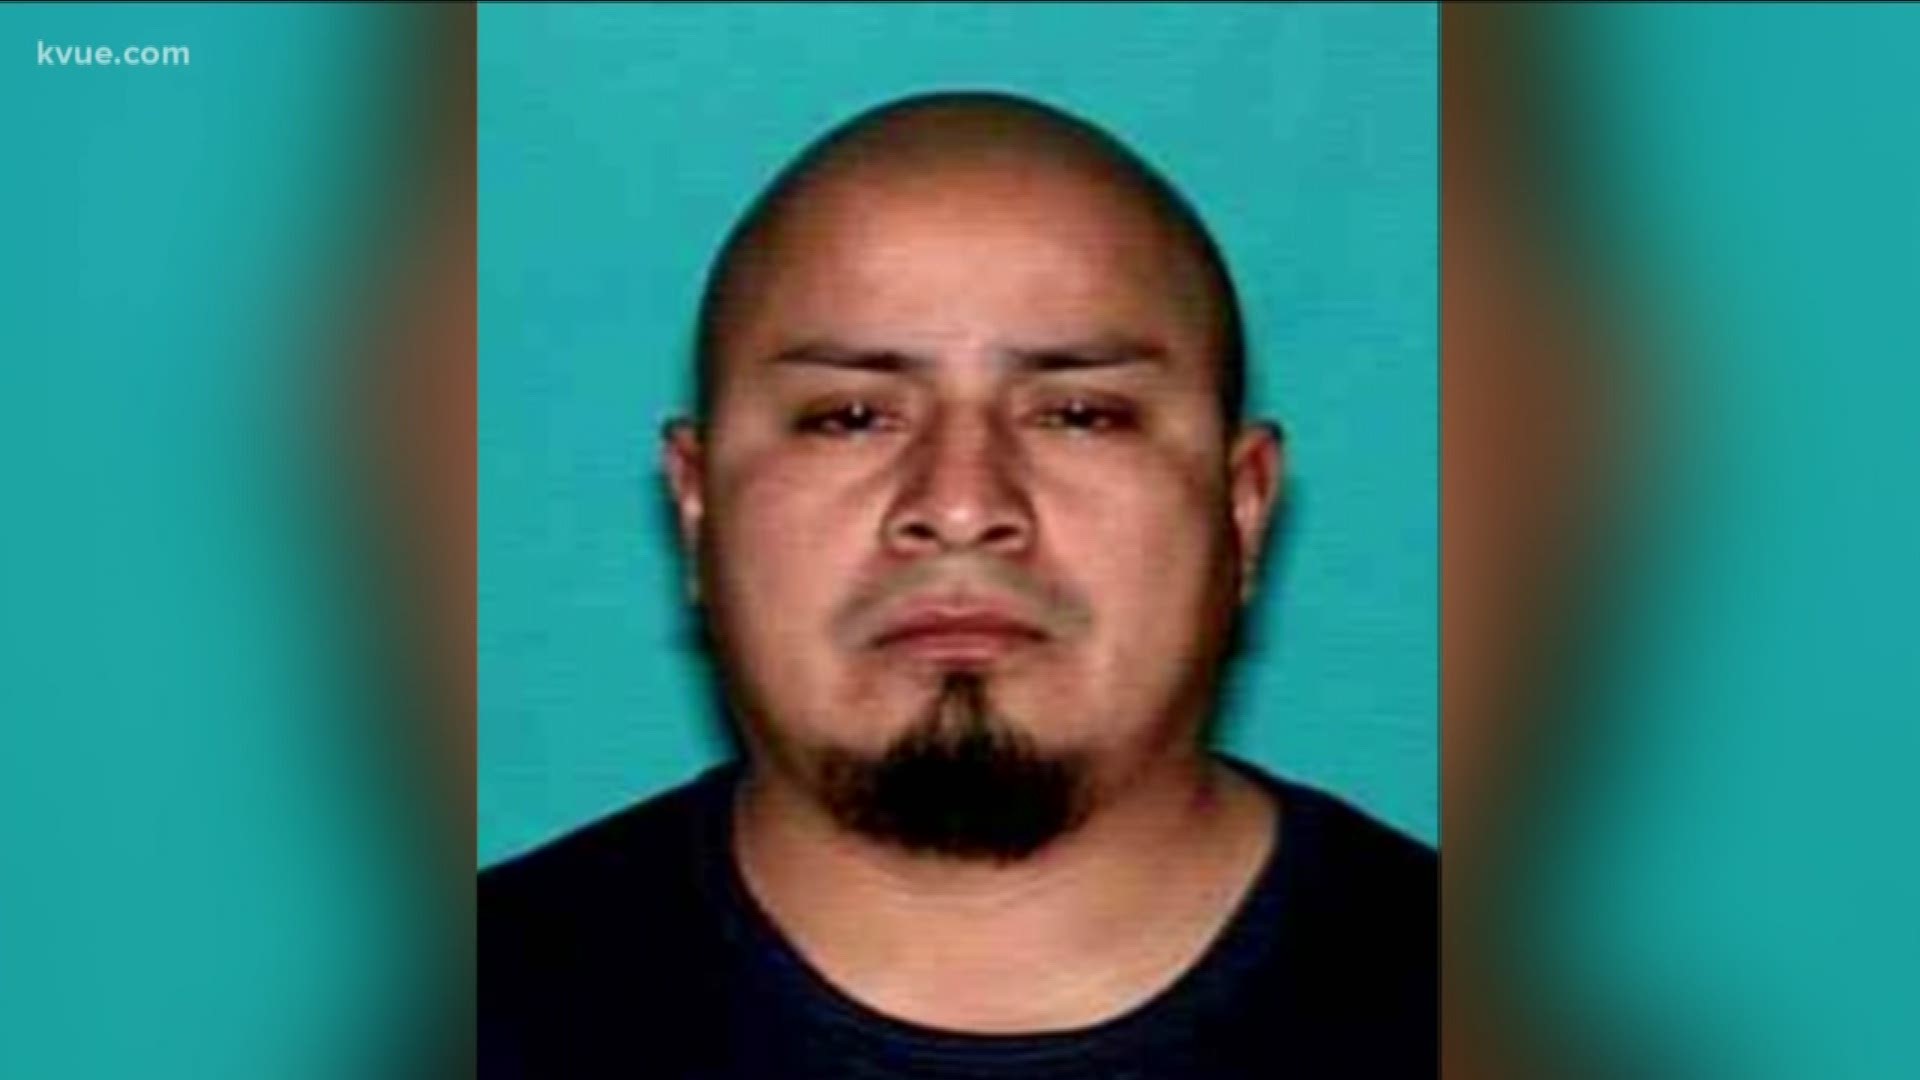 The Texas Rangers have identified the man behind a police ambush in San Marcos in April.